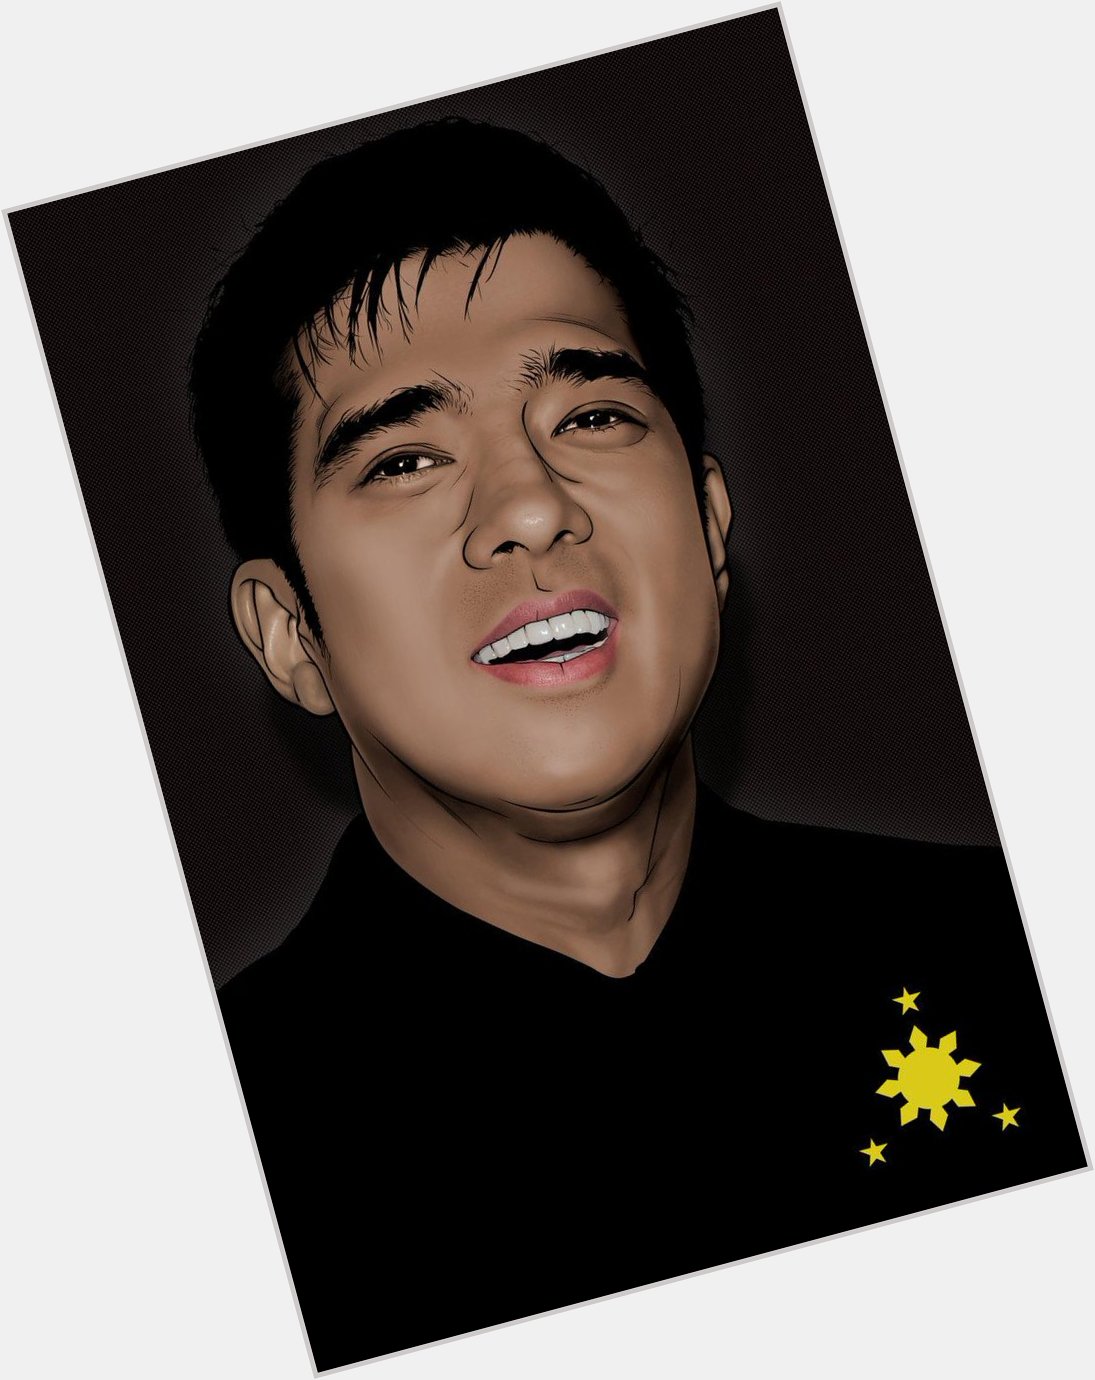 Happy Birthday s ating idol
\"The Man from Manila\" | \"The King of Pinoy Rap\"
  >>Francis Magalona<< CTTO 